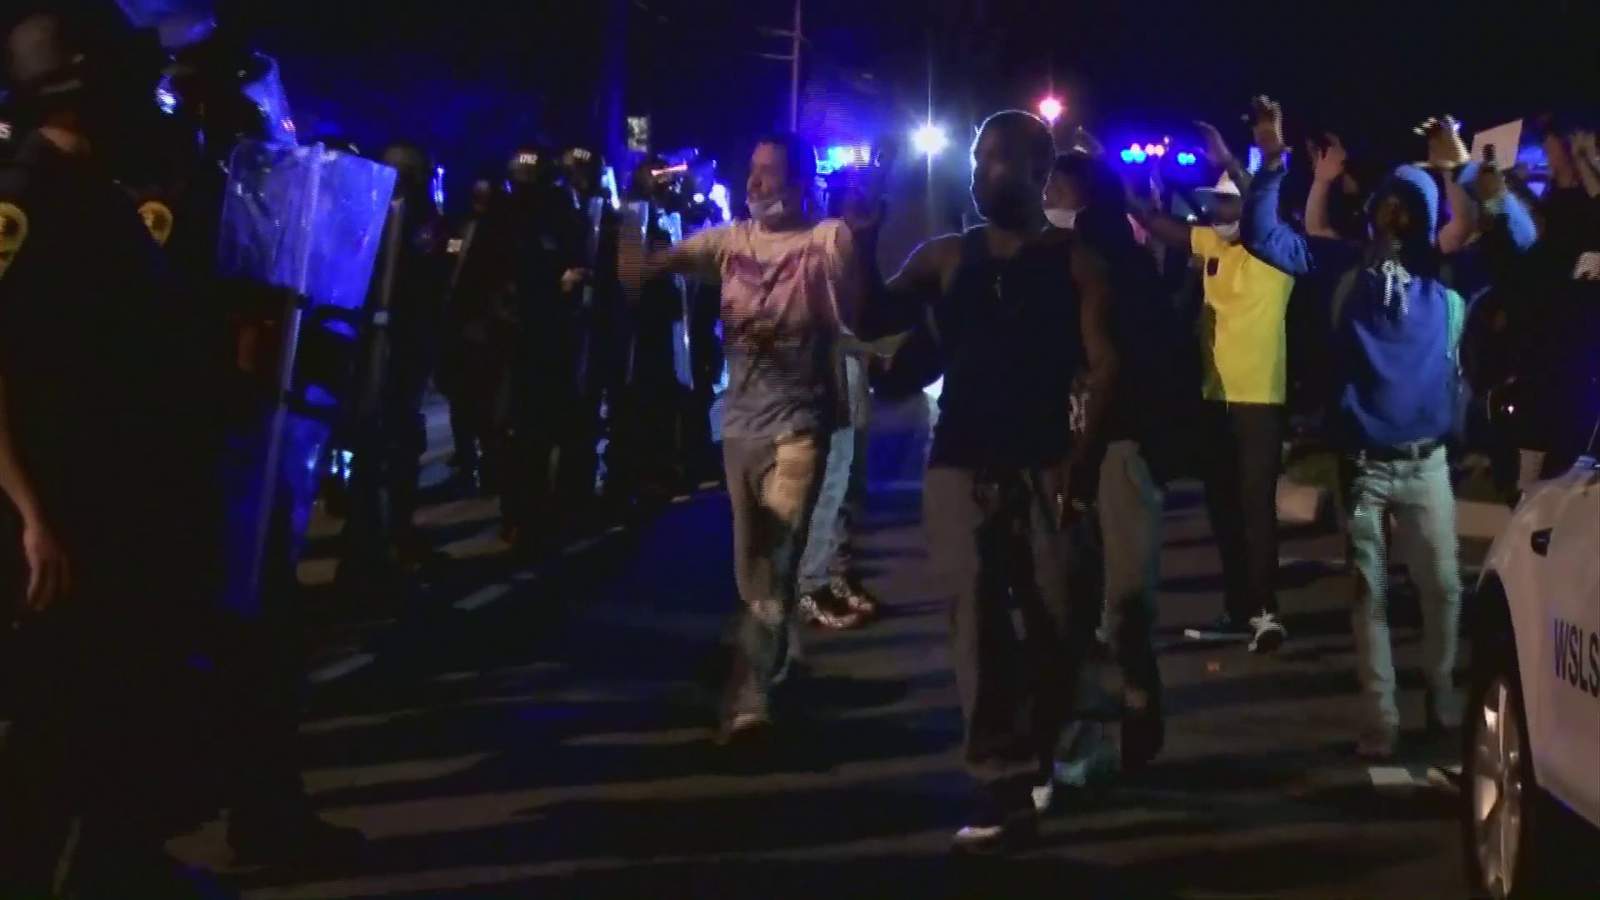 WATCH: Lynchburg officials hold press conference to discuss chaotic protests, mandatory curfew